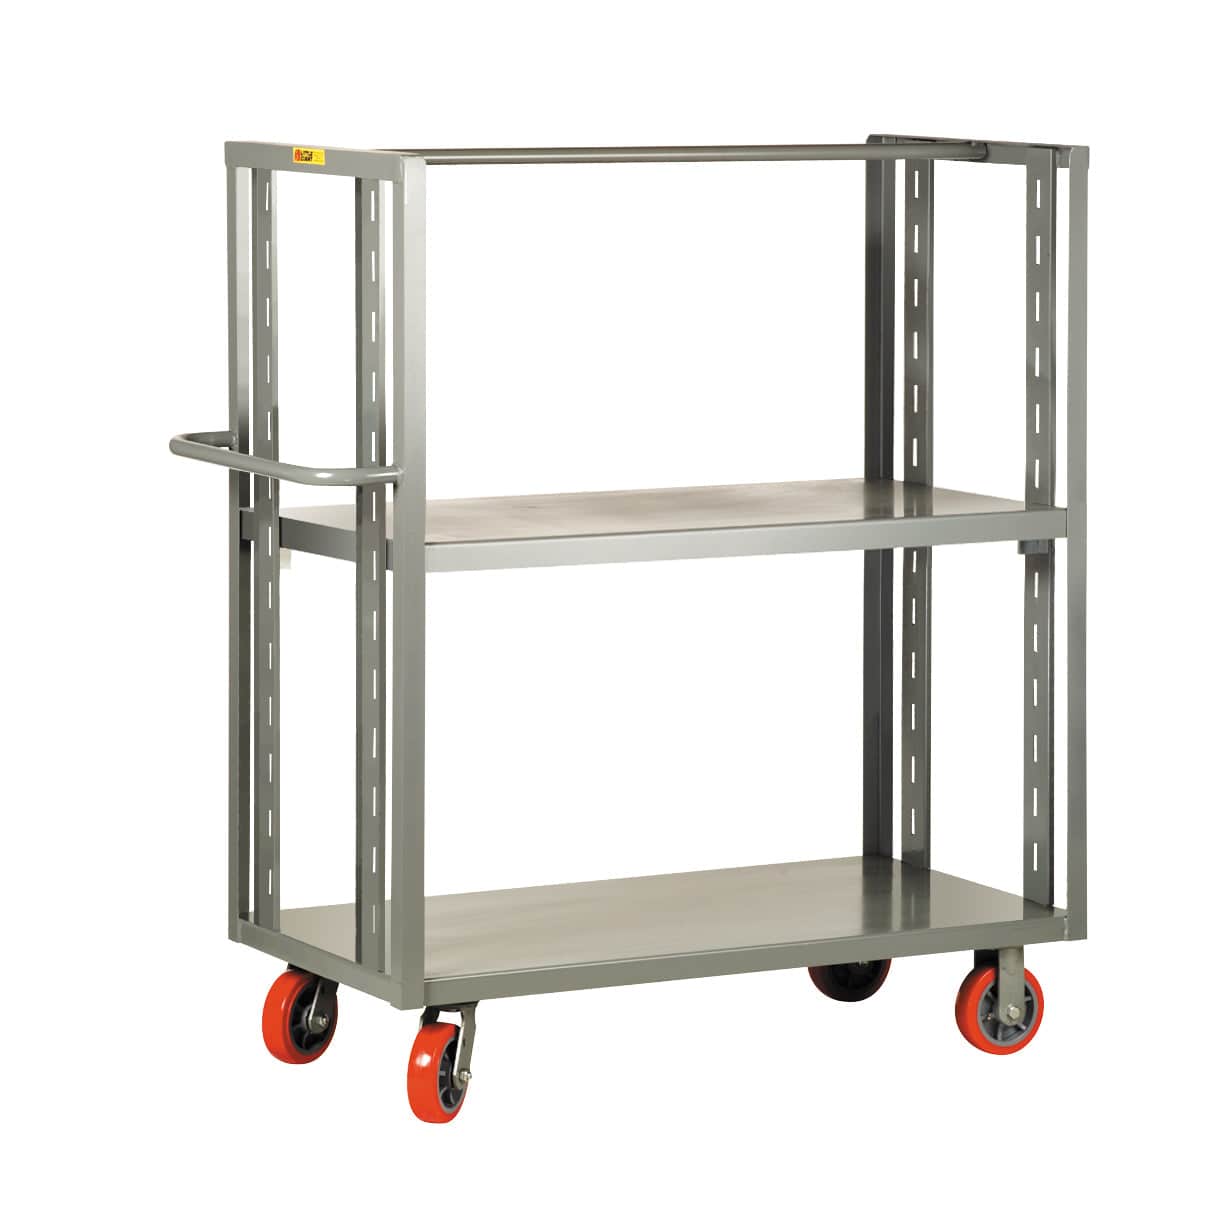 2-Sided Adjustable Shelf Truck with Open Angle Ends - Little Giant